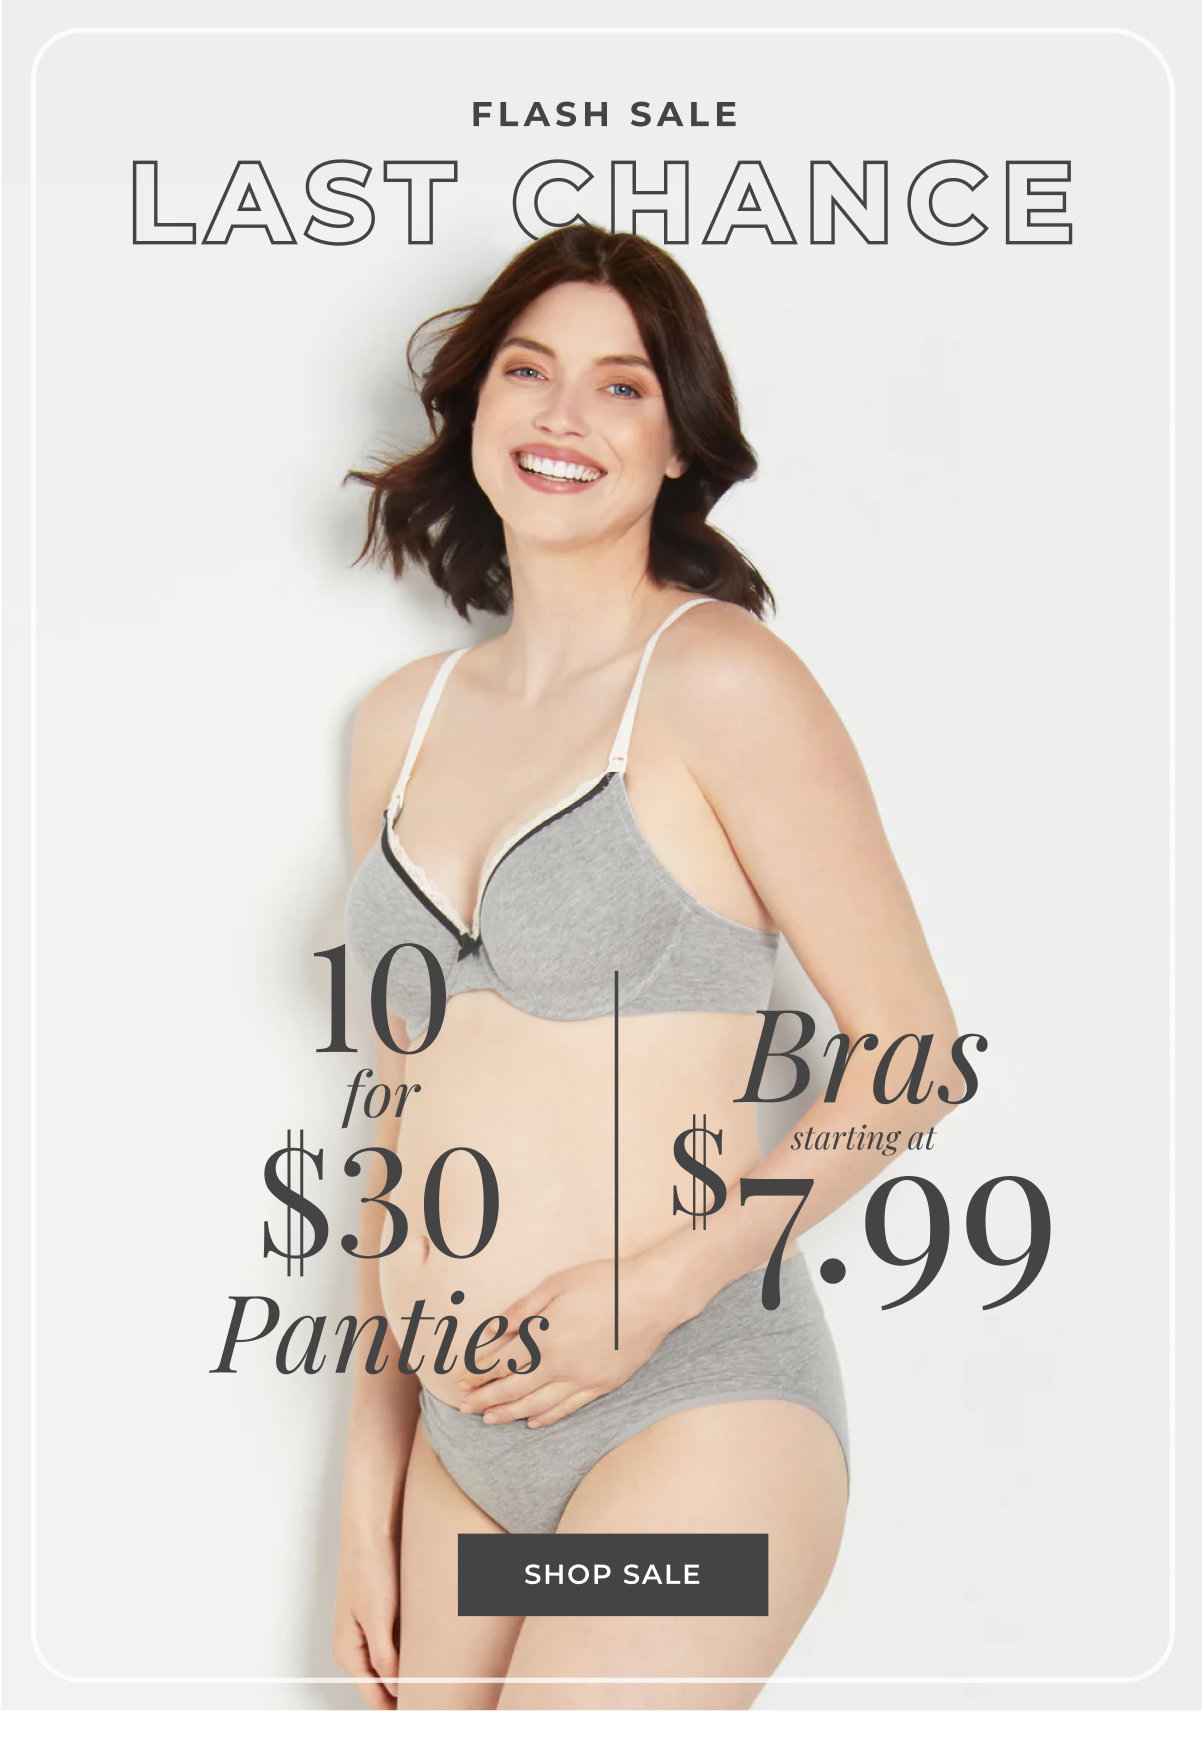 Shop Last Chance Bras and Panties